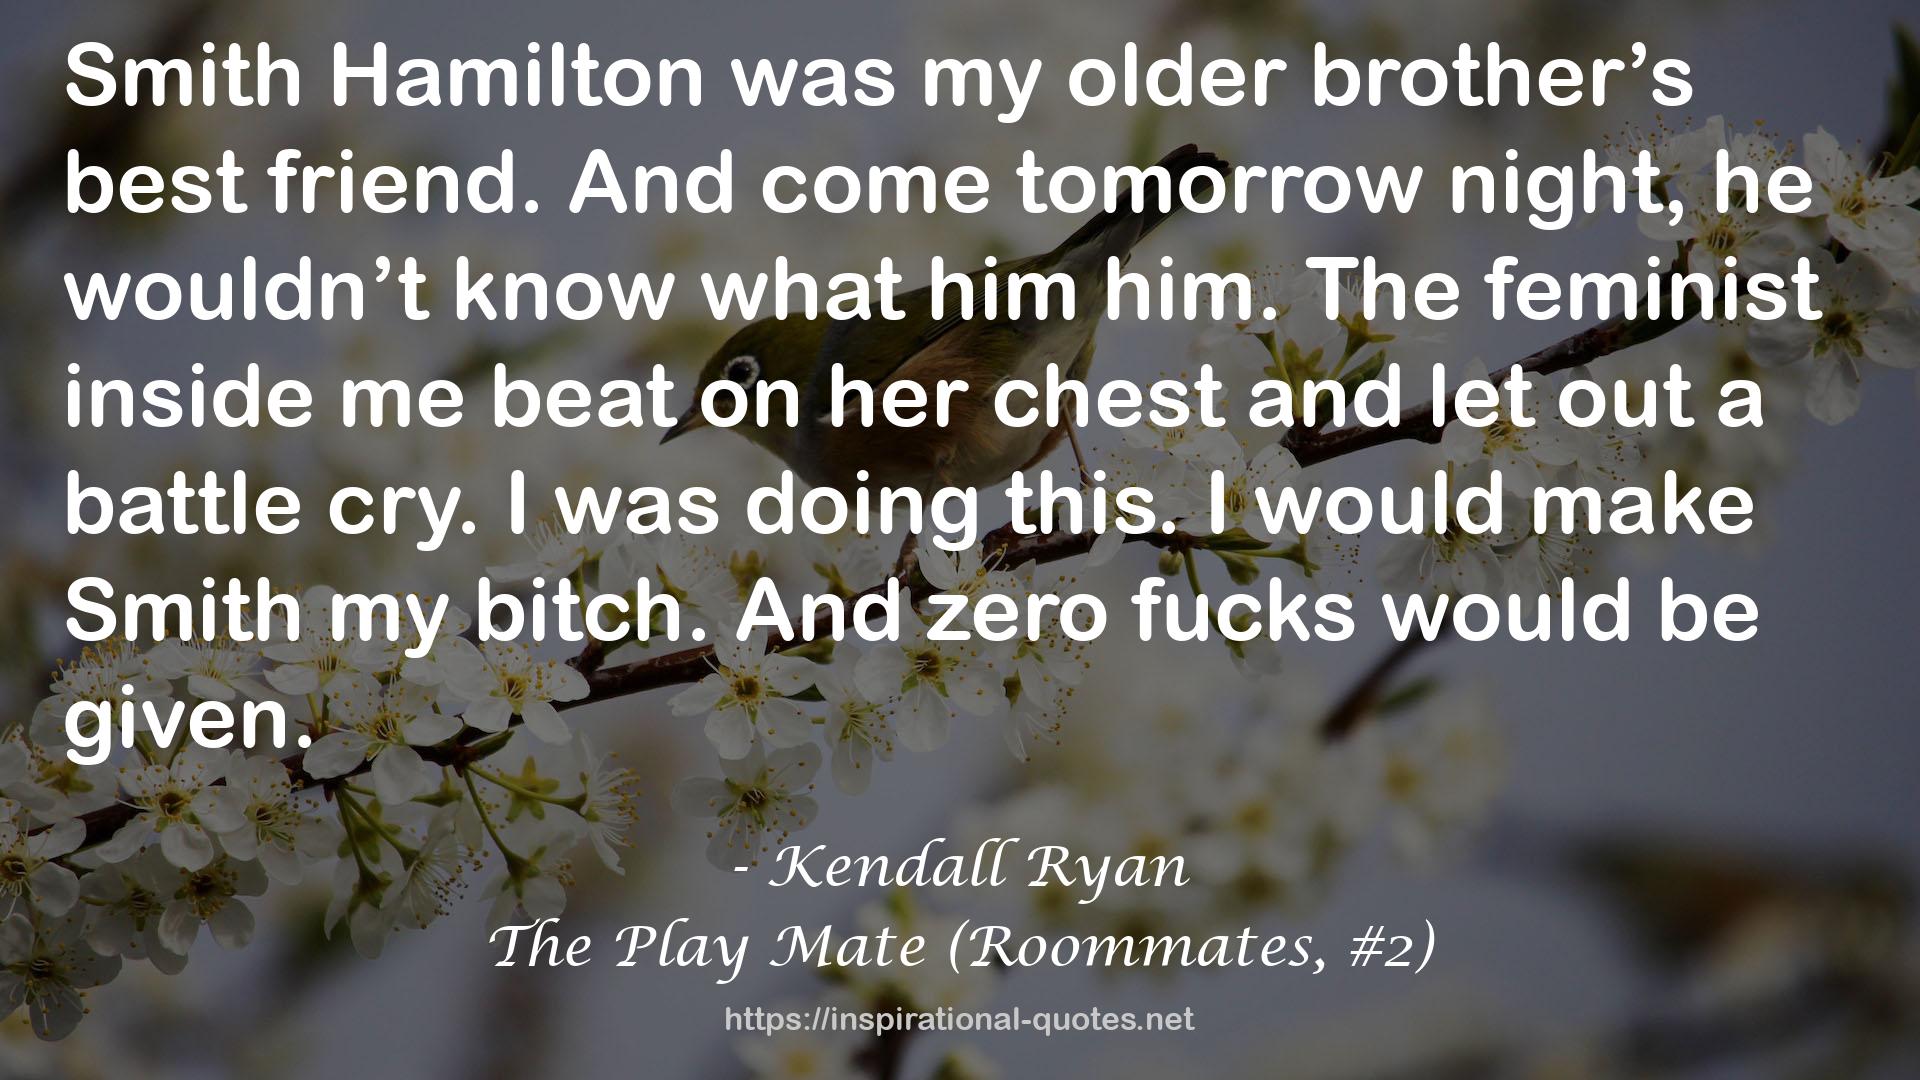 The Play Mate (Roommates, #2) QUOTES